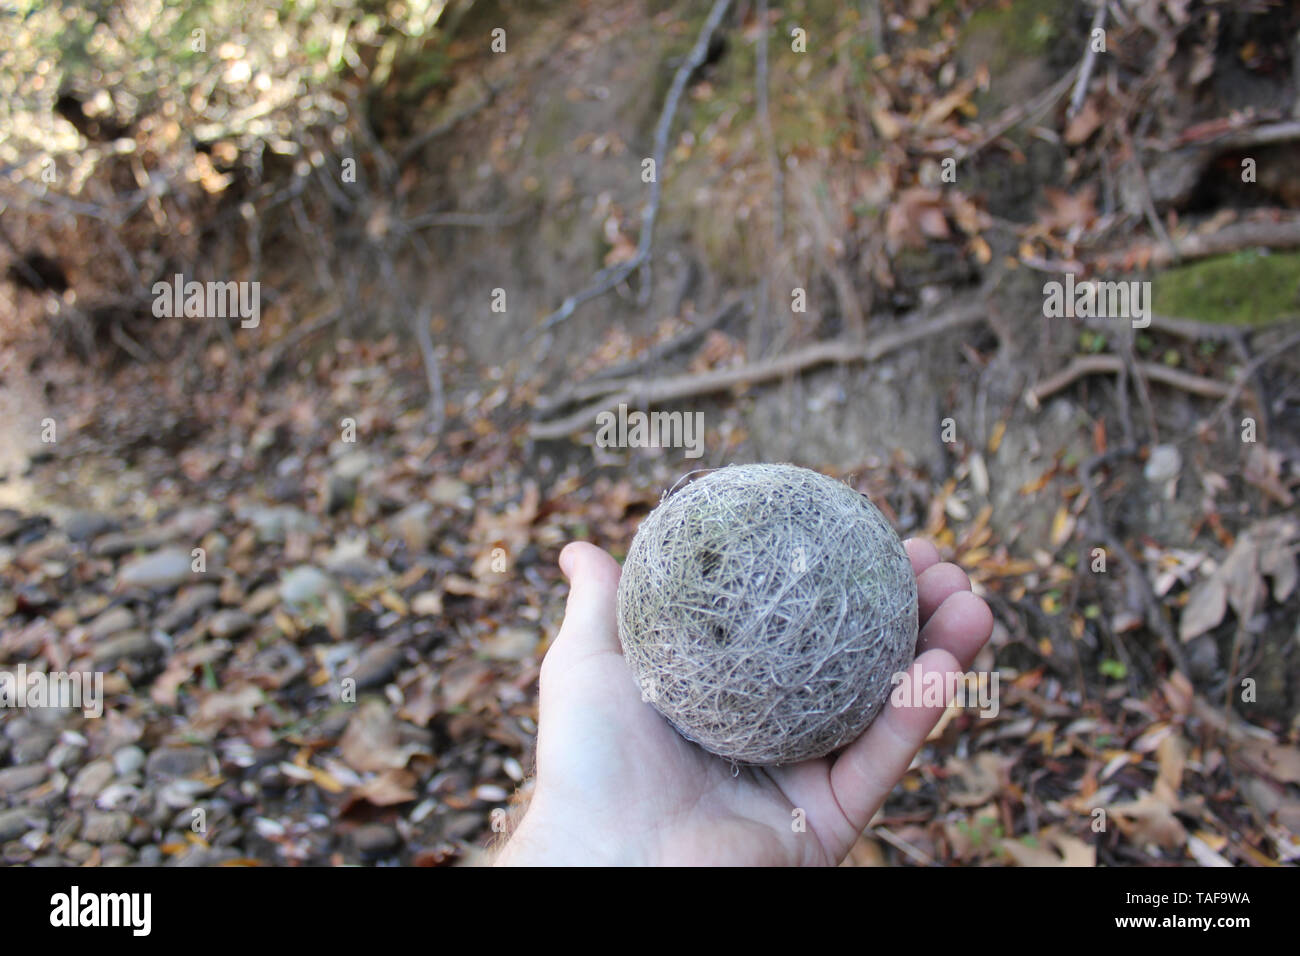 strange natural ball found in forest Stock Photo